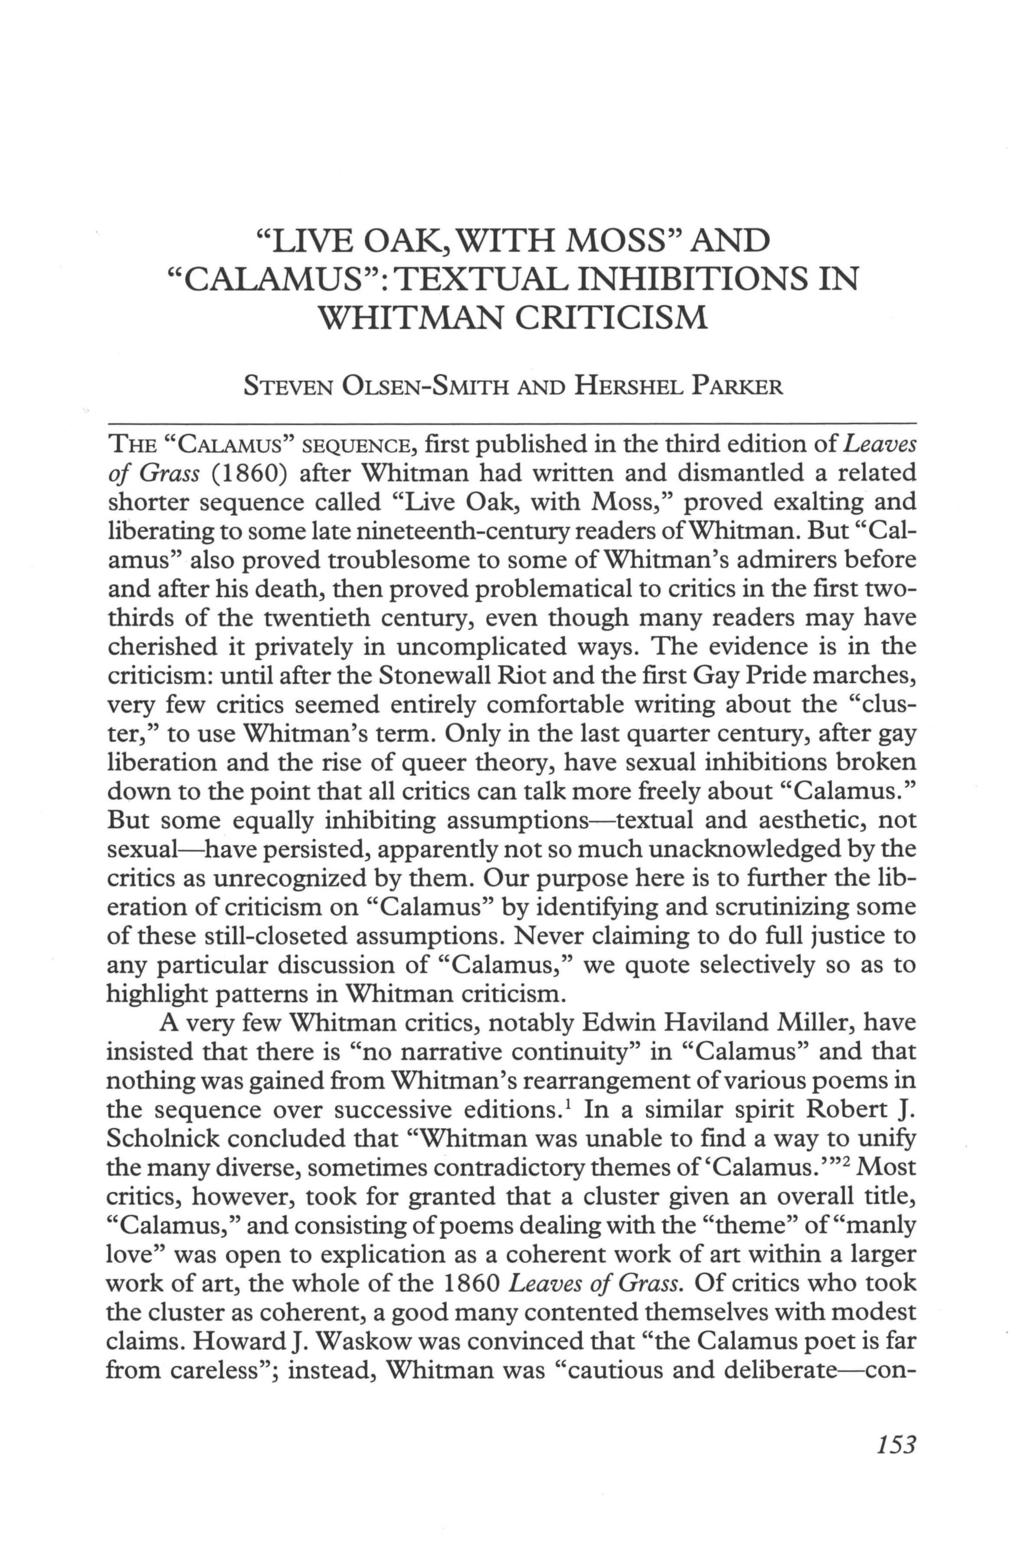 "LIVE OAK, WITH MOSS" AND "CALAMUS": TEXTUAL INHIBITIONS IN WHITMAN CRITICISM STEVEN OLSEN-SMITH AND HERSHEL PARKER THE "CALAMUS" SEQUENCE, first published in the third edition of Leaves of Grass